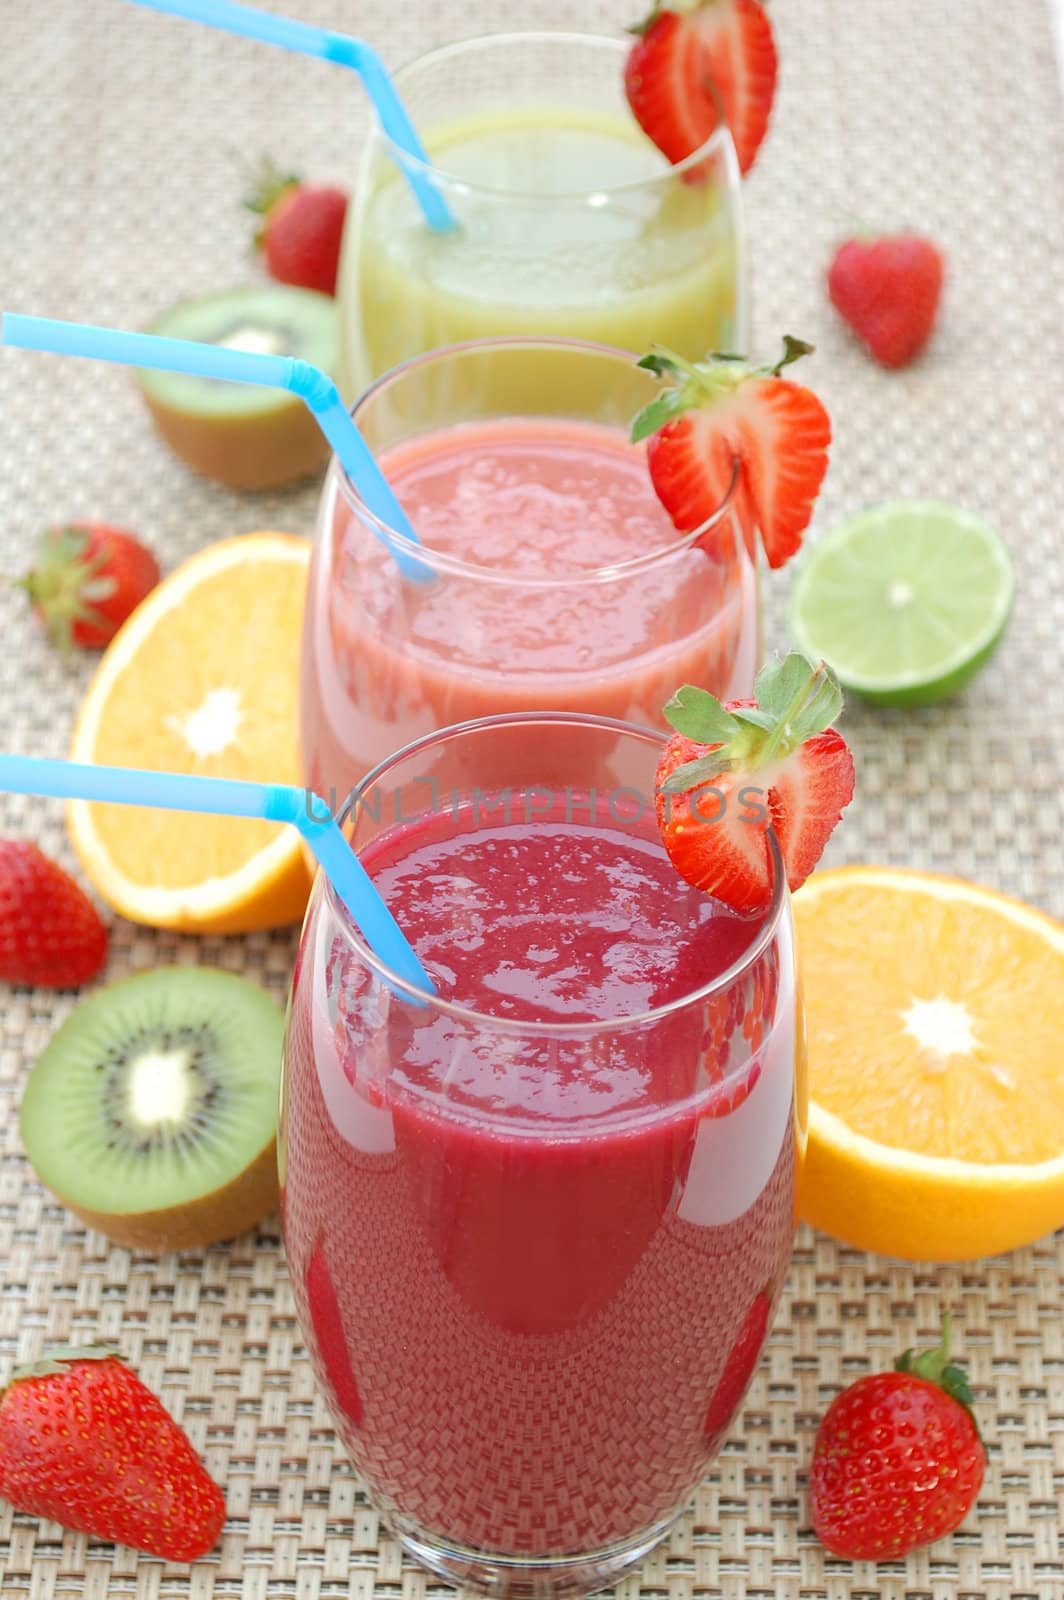 Three smoothies and sliced fruit